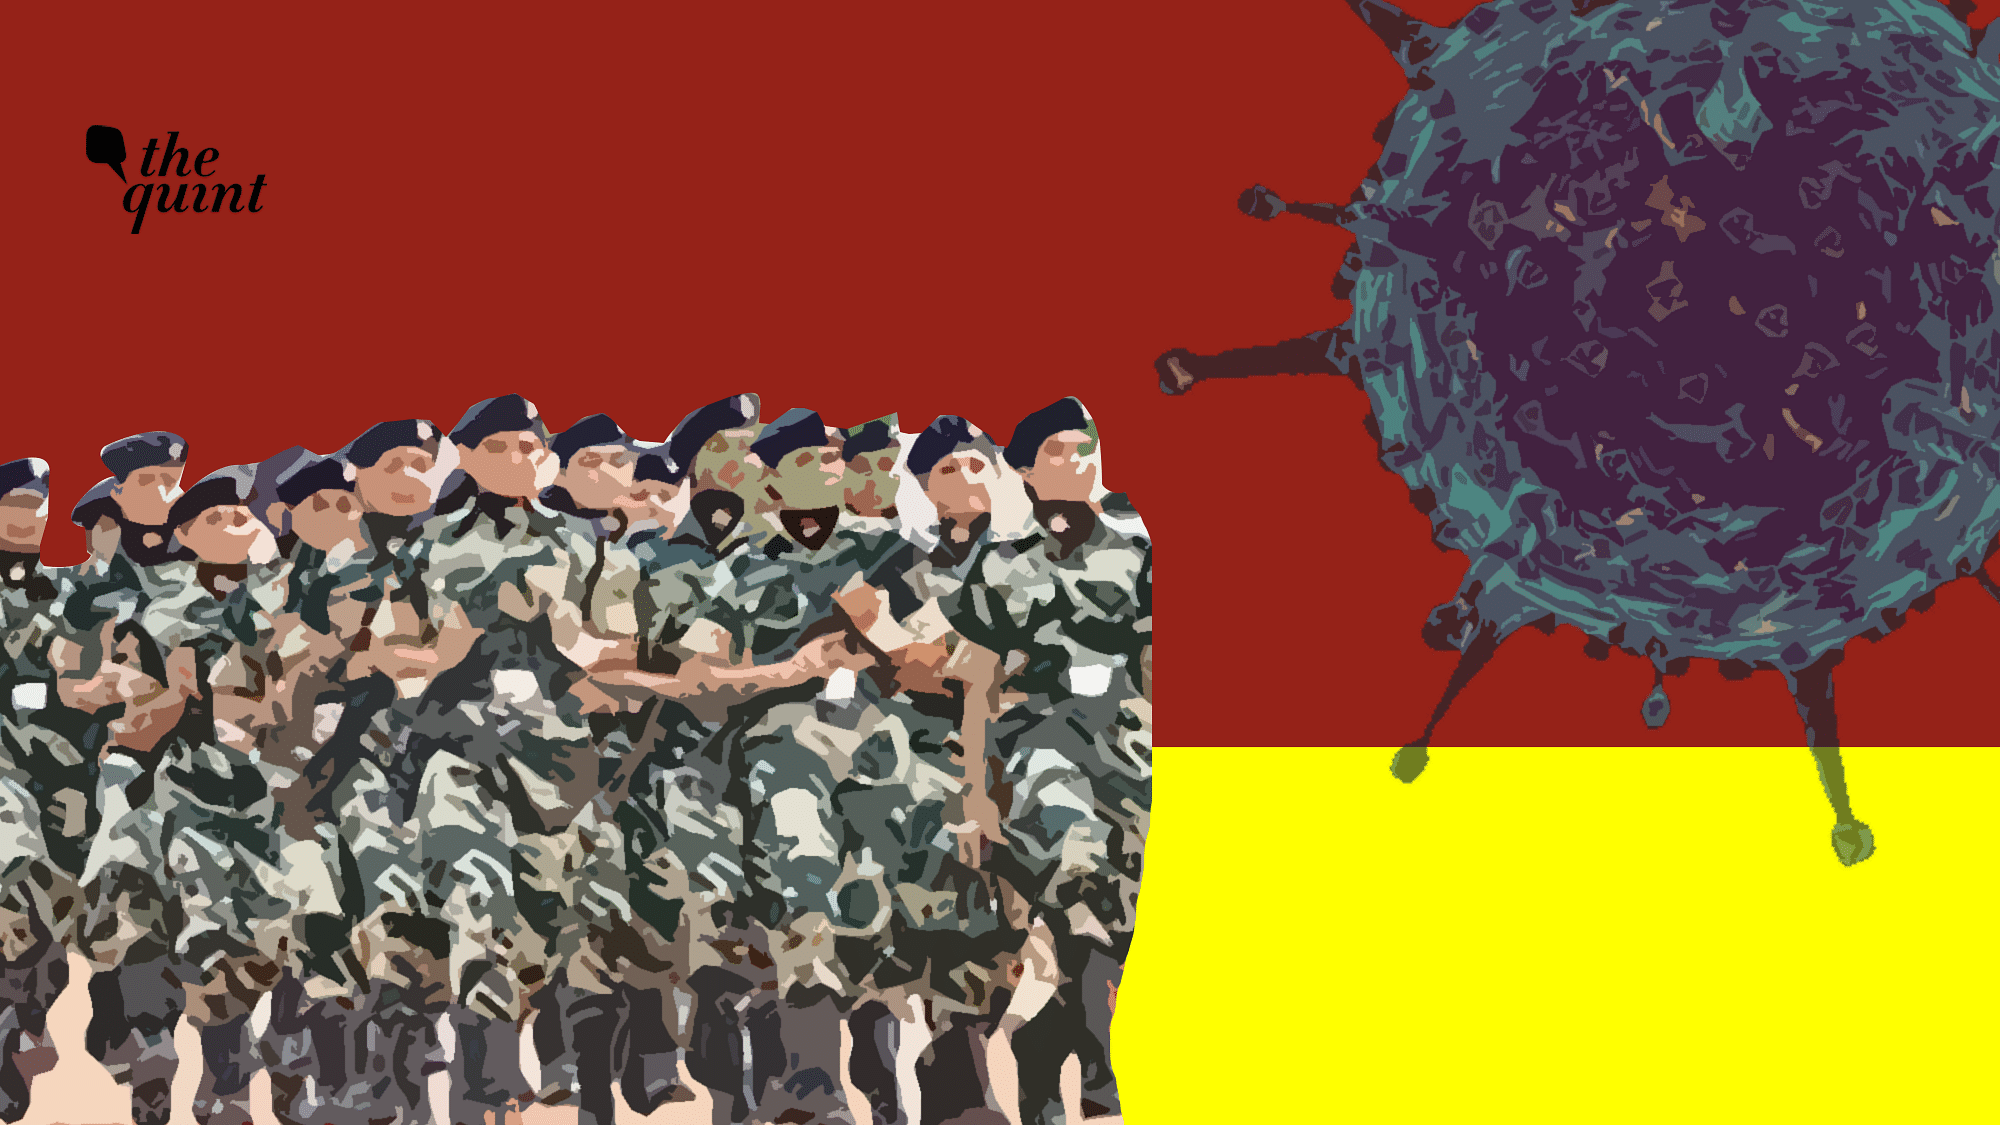 Instead of 14 days, CRPF reduced quarantine period to 5 days for personnel returning from leave. As a result CRPF's 31st Battalion, based in Delhi is now a COVID-19 hotspot, with over 130 positive cases. 